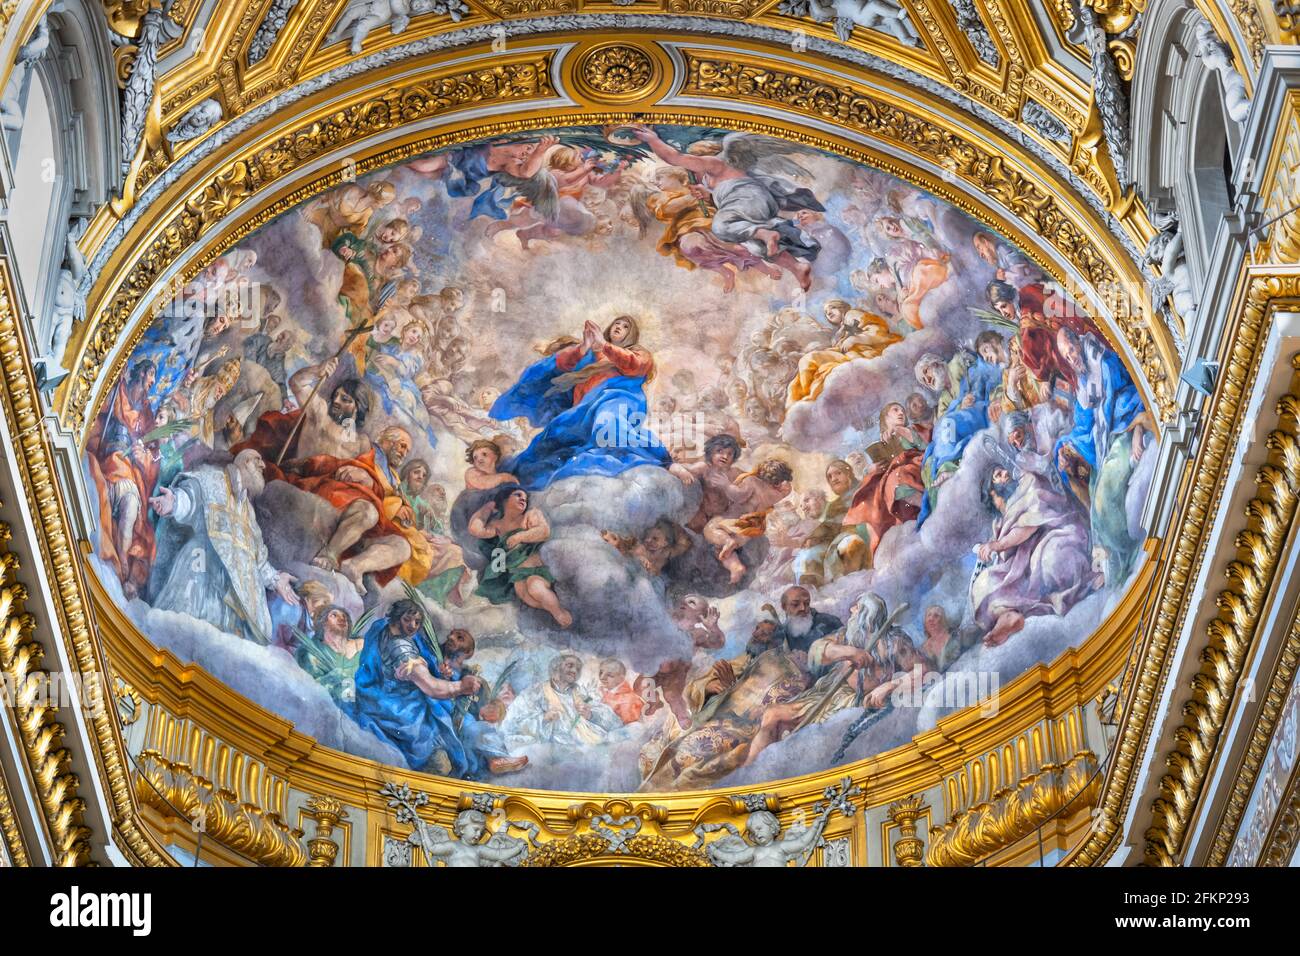 Apse fresco painting Assumption of the Virgin Mary between Angels and Saints by Pietro da Cortona in Santa Maria in Vallicella (Chiesa Nuova) Baroque Stock Photo